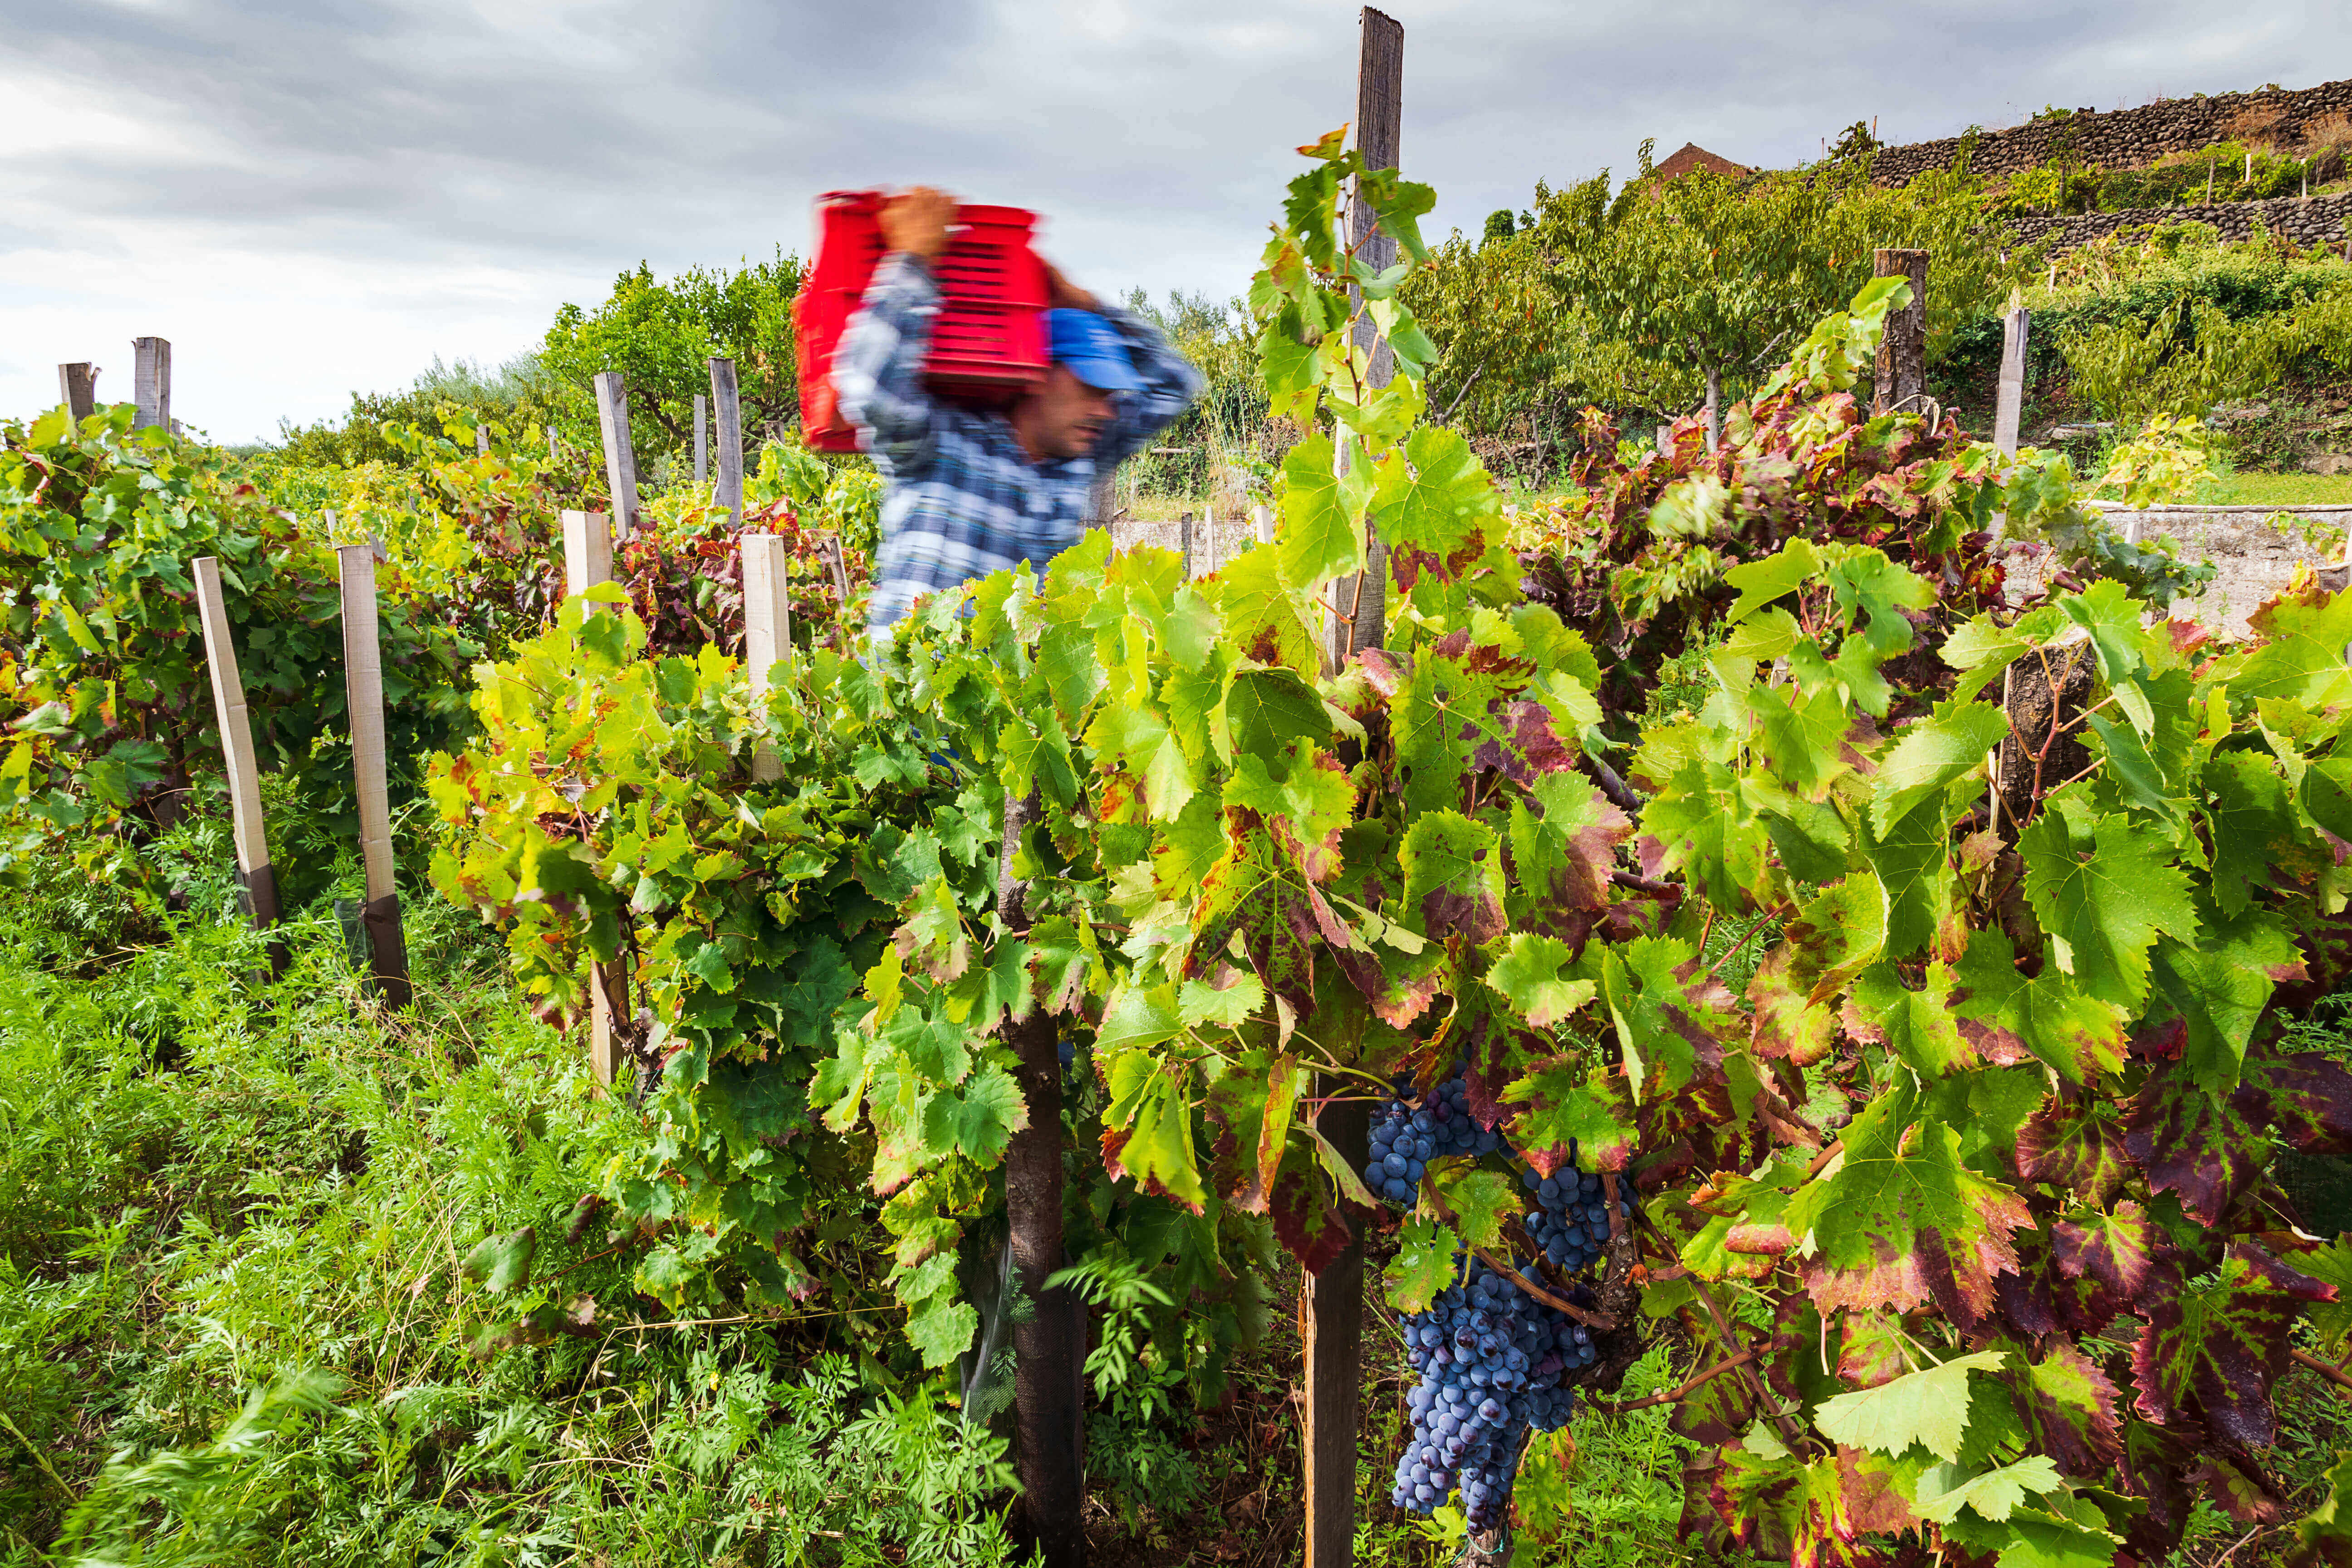 The harvesting of wine grapes